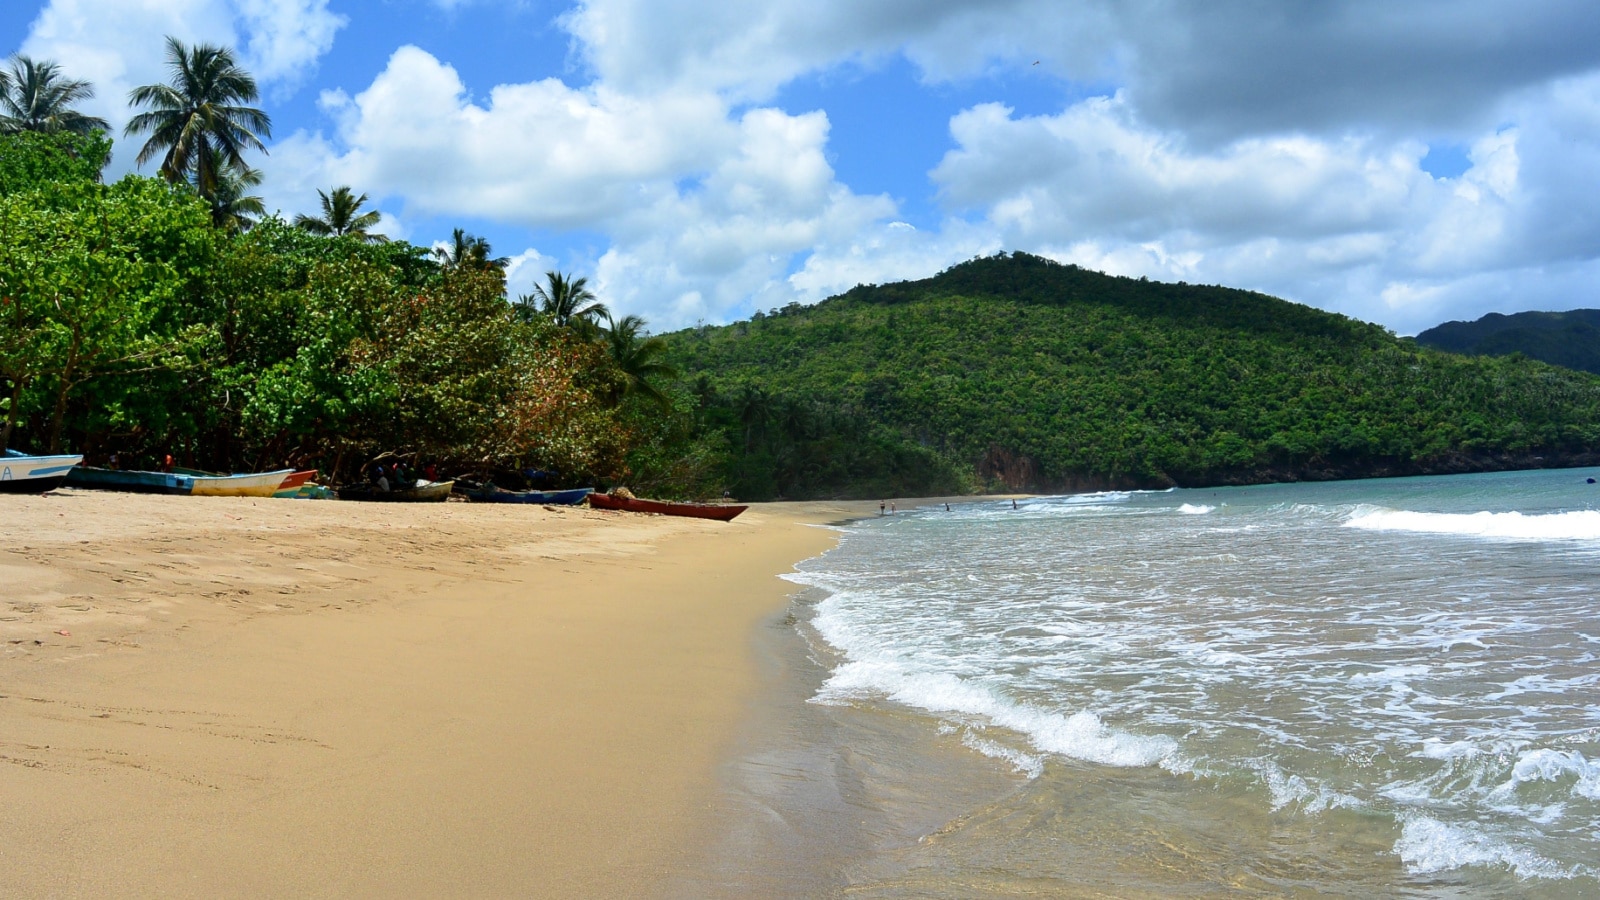 Deserted beach with clear water of the Atlantic Ocean near the mountains and cliffs overgrown with green jungles and palm trees on a tropical island. Dominican Republic, Samana Peninsula